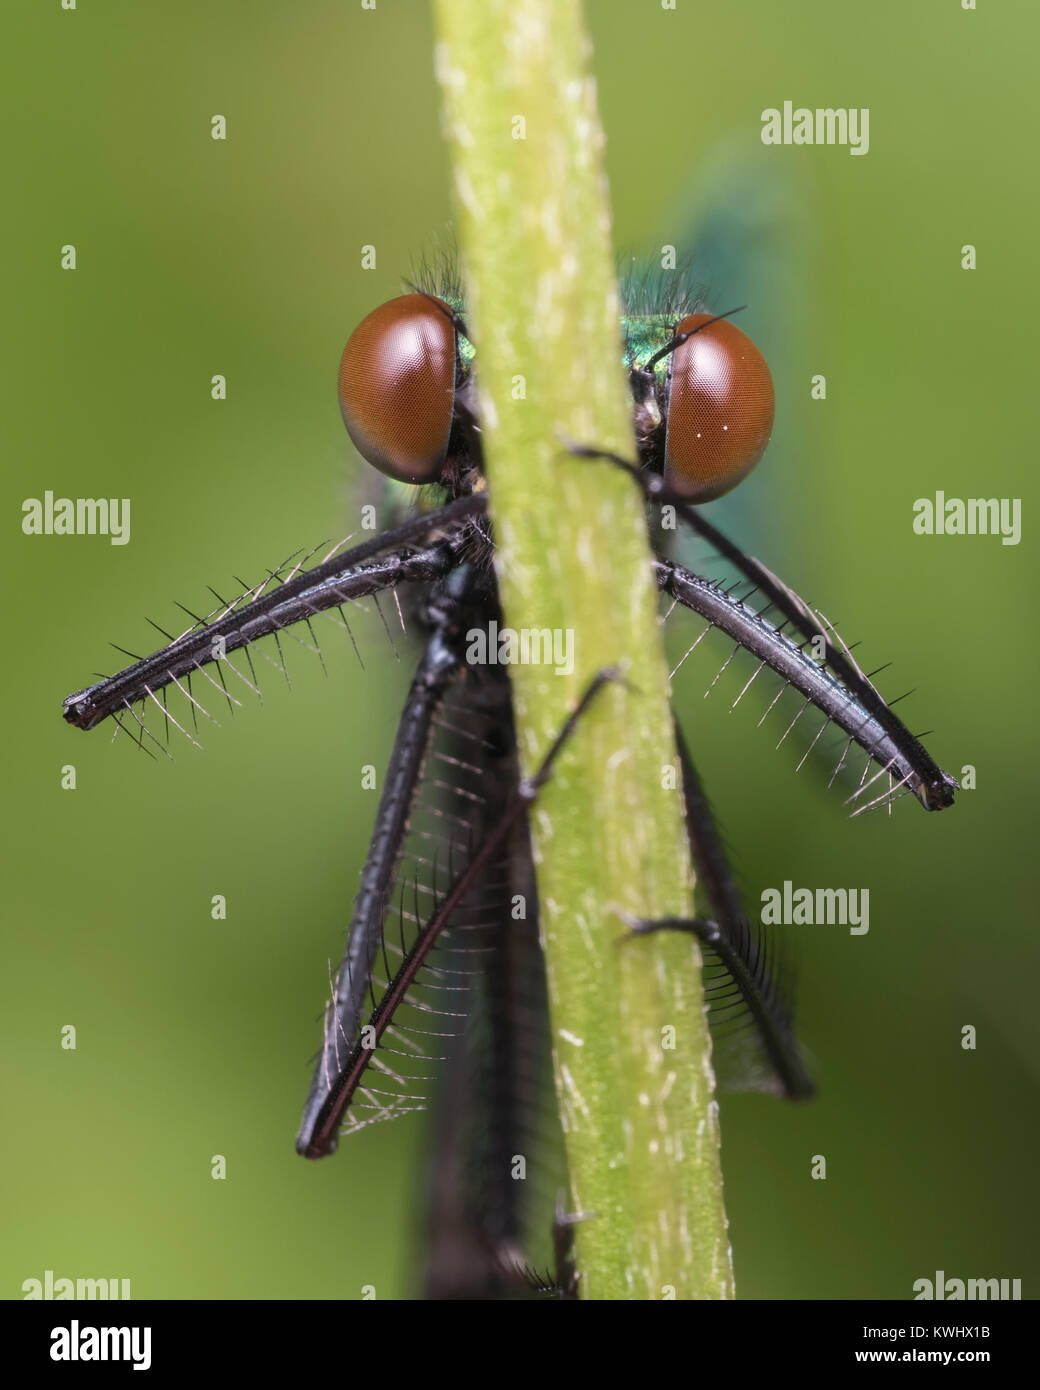 Close up frontal photo of a male Banded Demoiselle Damselfly (Calopteryx splendens) perched on a stem of grass. Cahir, Tipperary, Ireland. Stock Photo